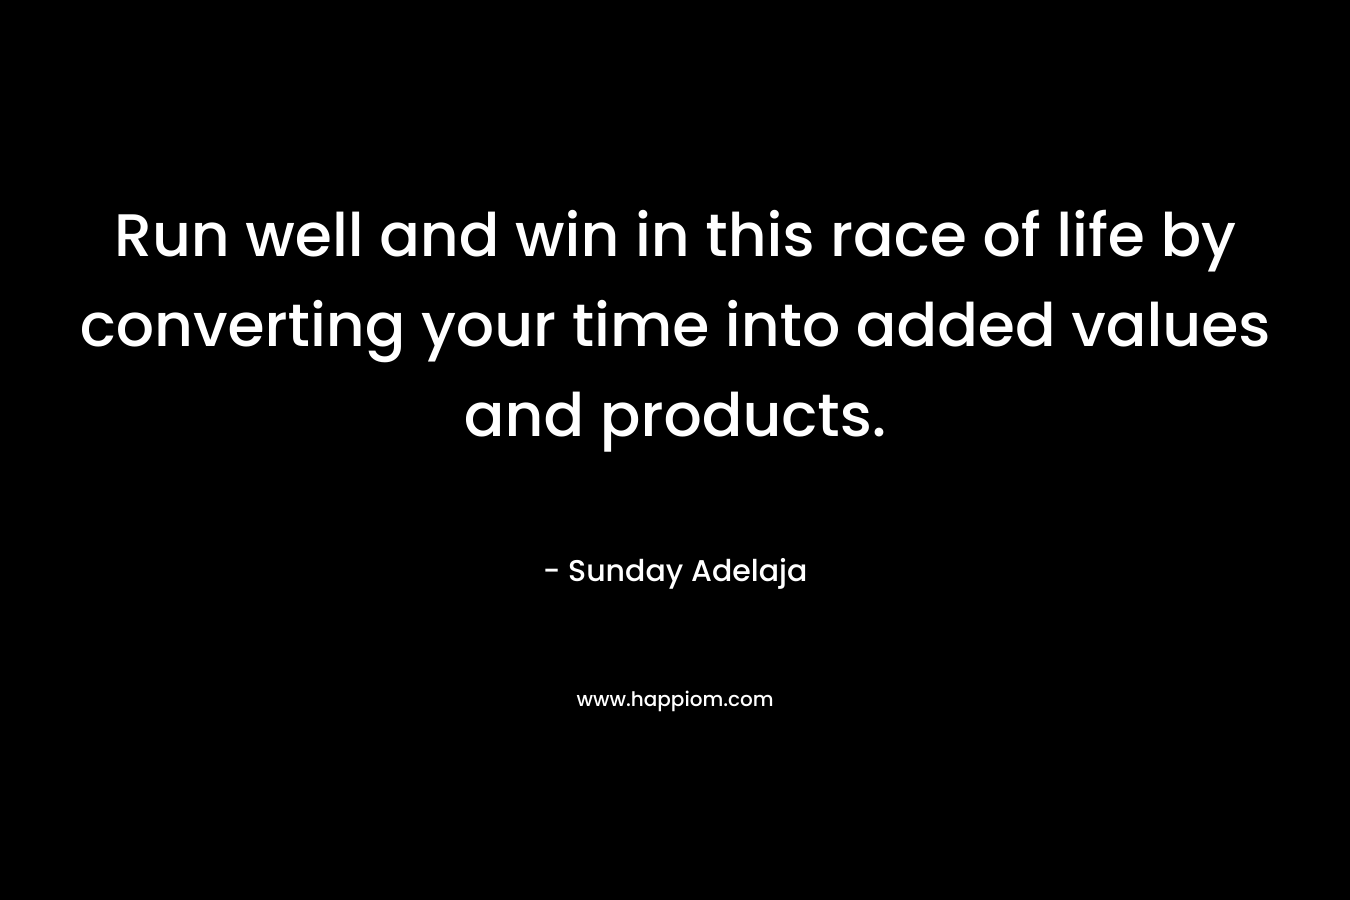 Run well and win in this race of life by converting your time into added values and products.